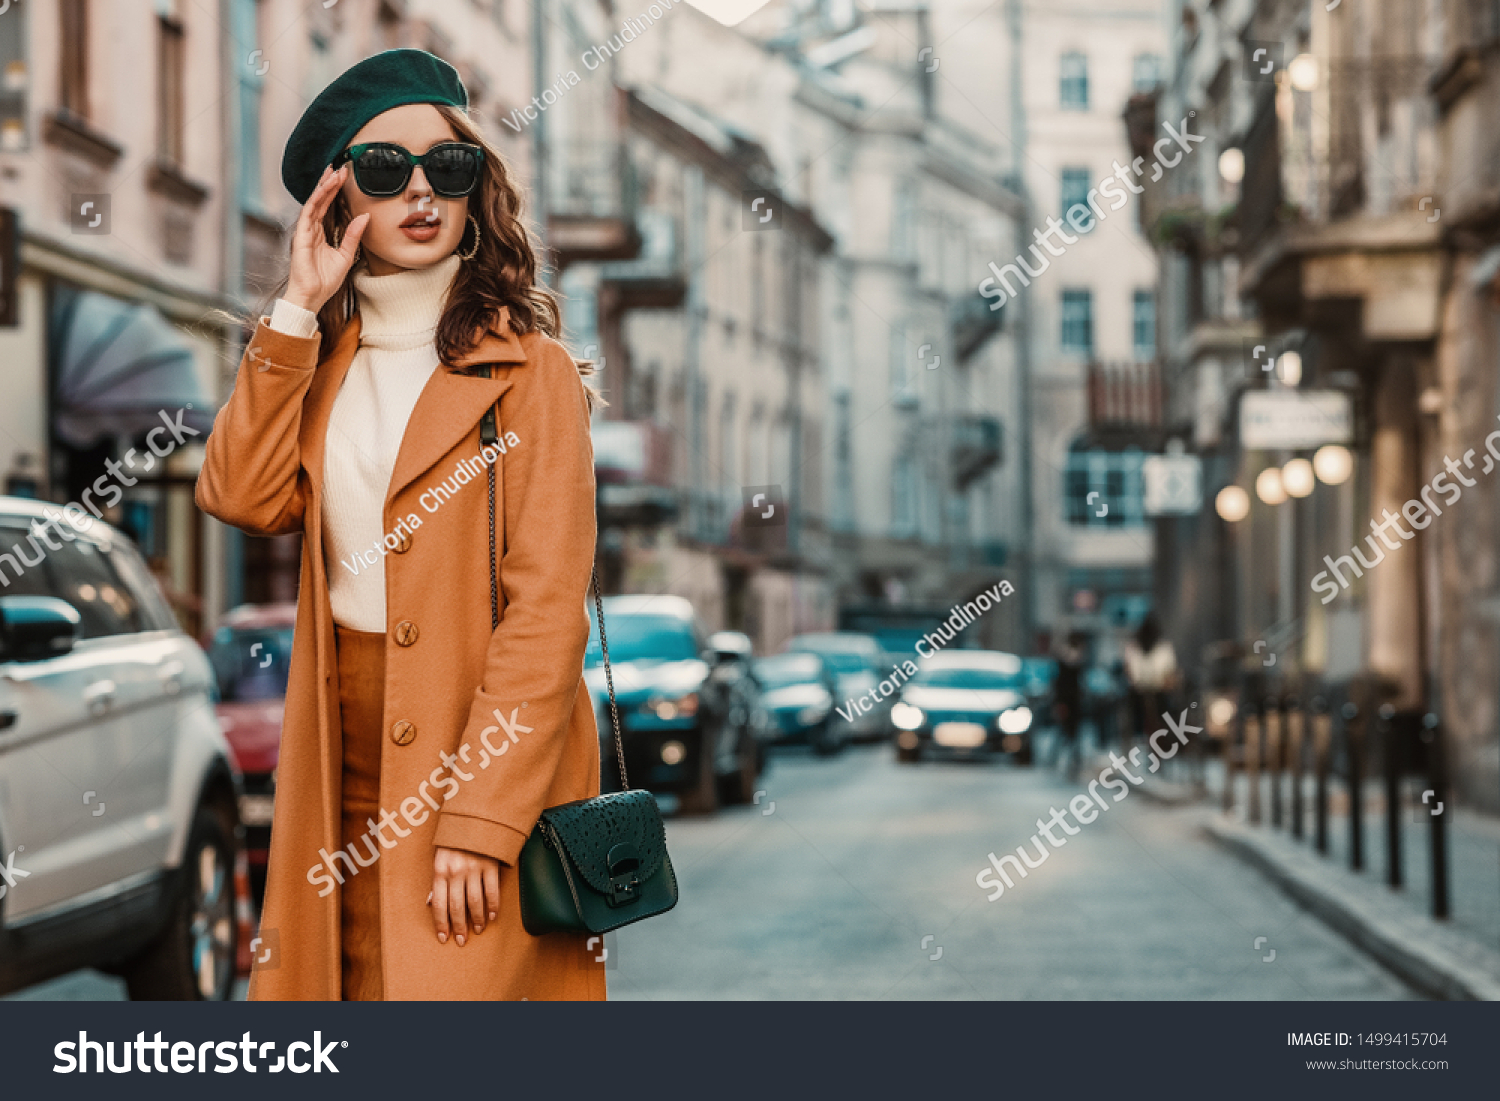 Outdoor autumn portrait of young elegant fashionable woman wearing trendy sunglasses, camel color coat, turtleneck, with textured leather shoulder bag, walking in street of European city. Copy space #1499415704